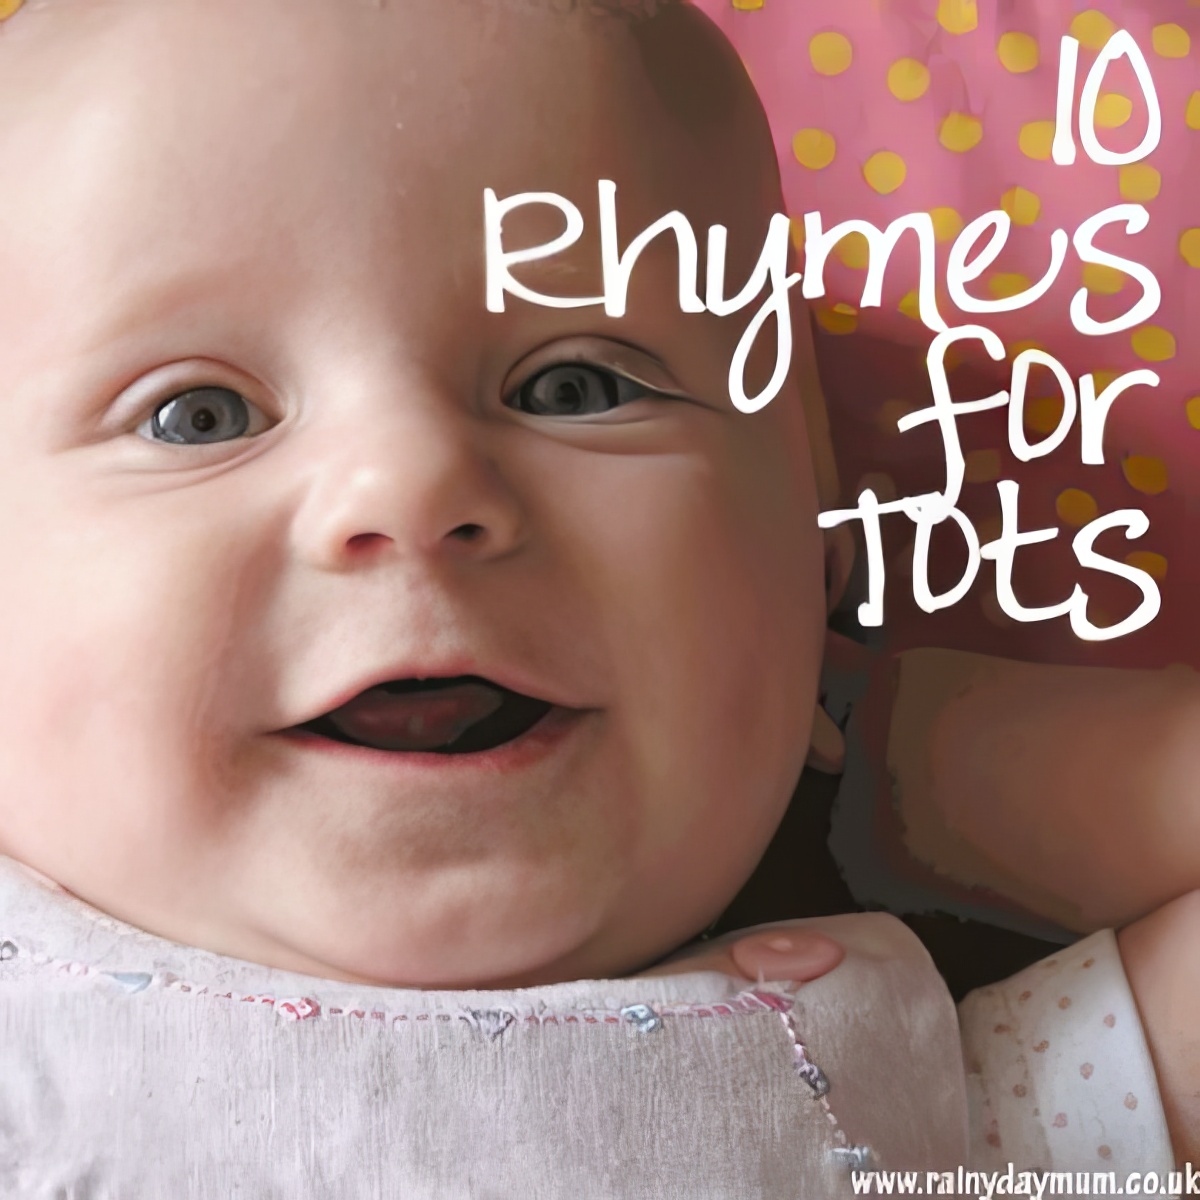 10 Nursery Rhymes Toddlers. Activities for 1-Year Olds. Singing Rhymes Together